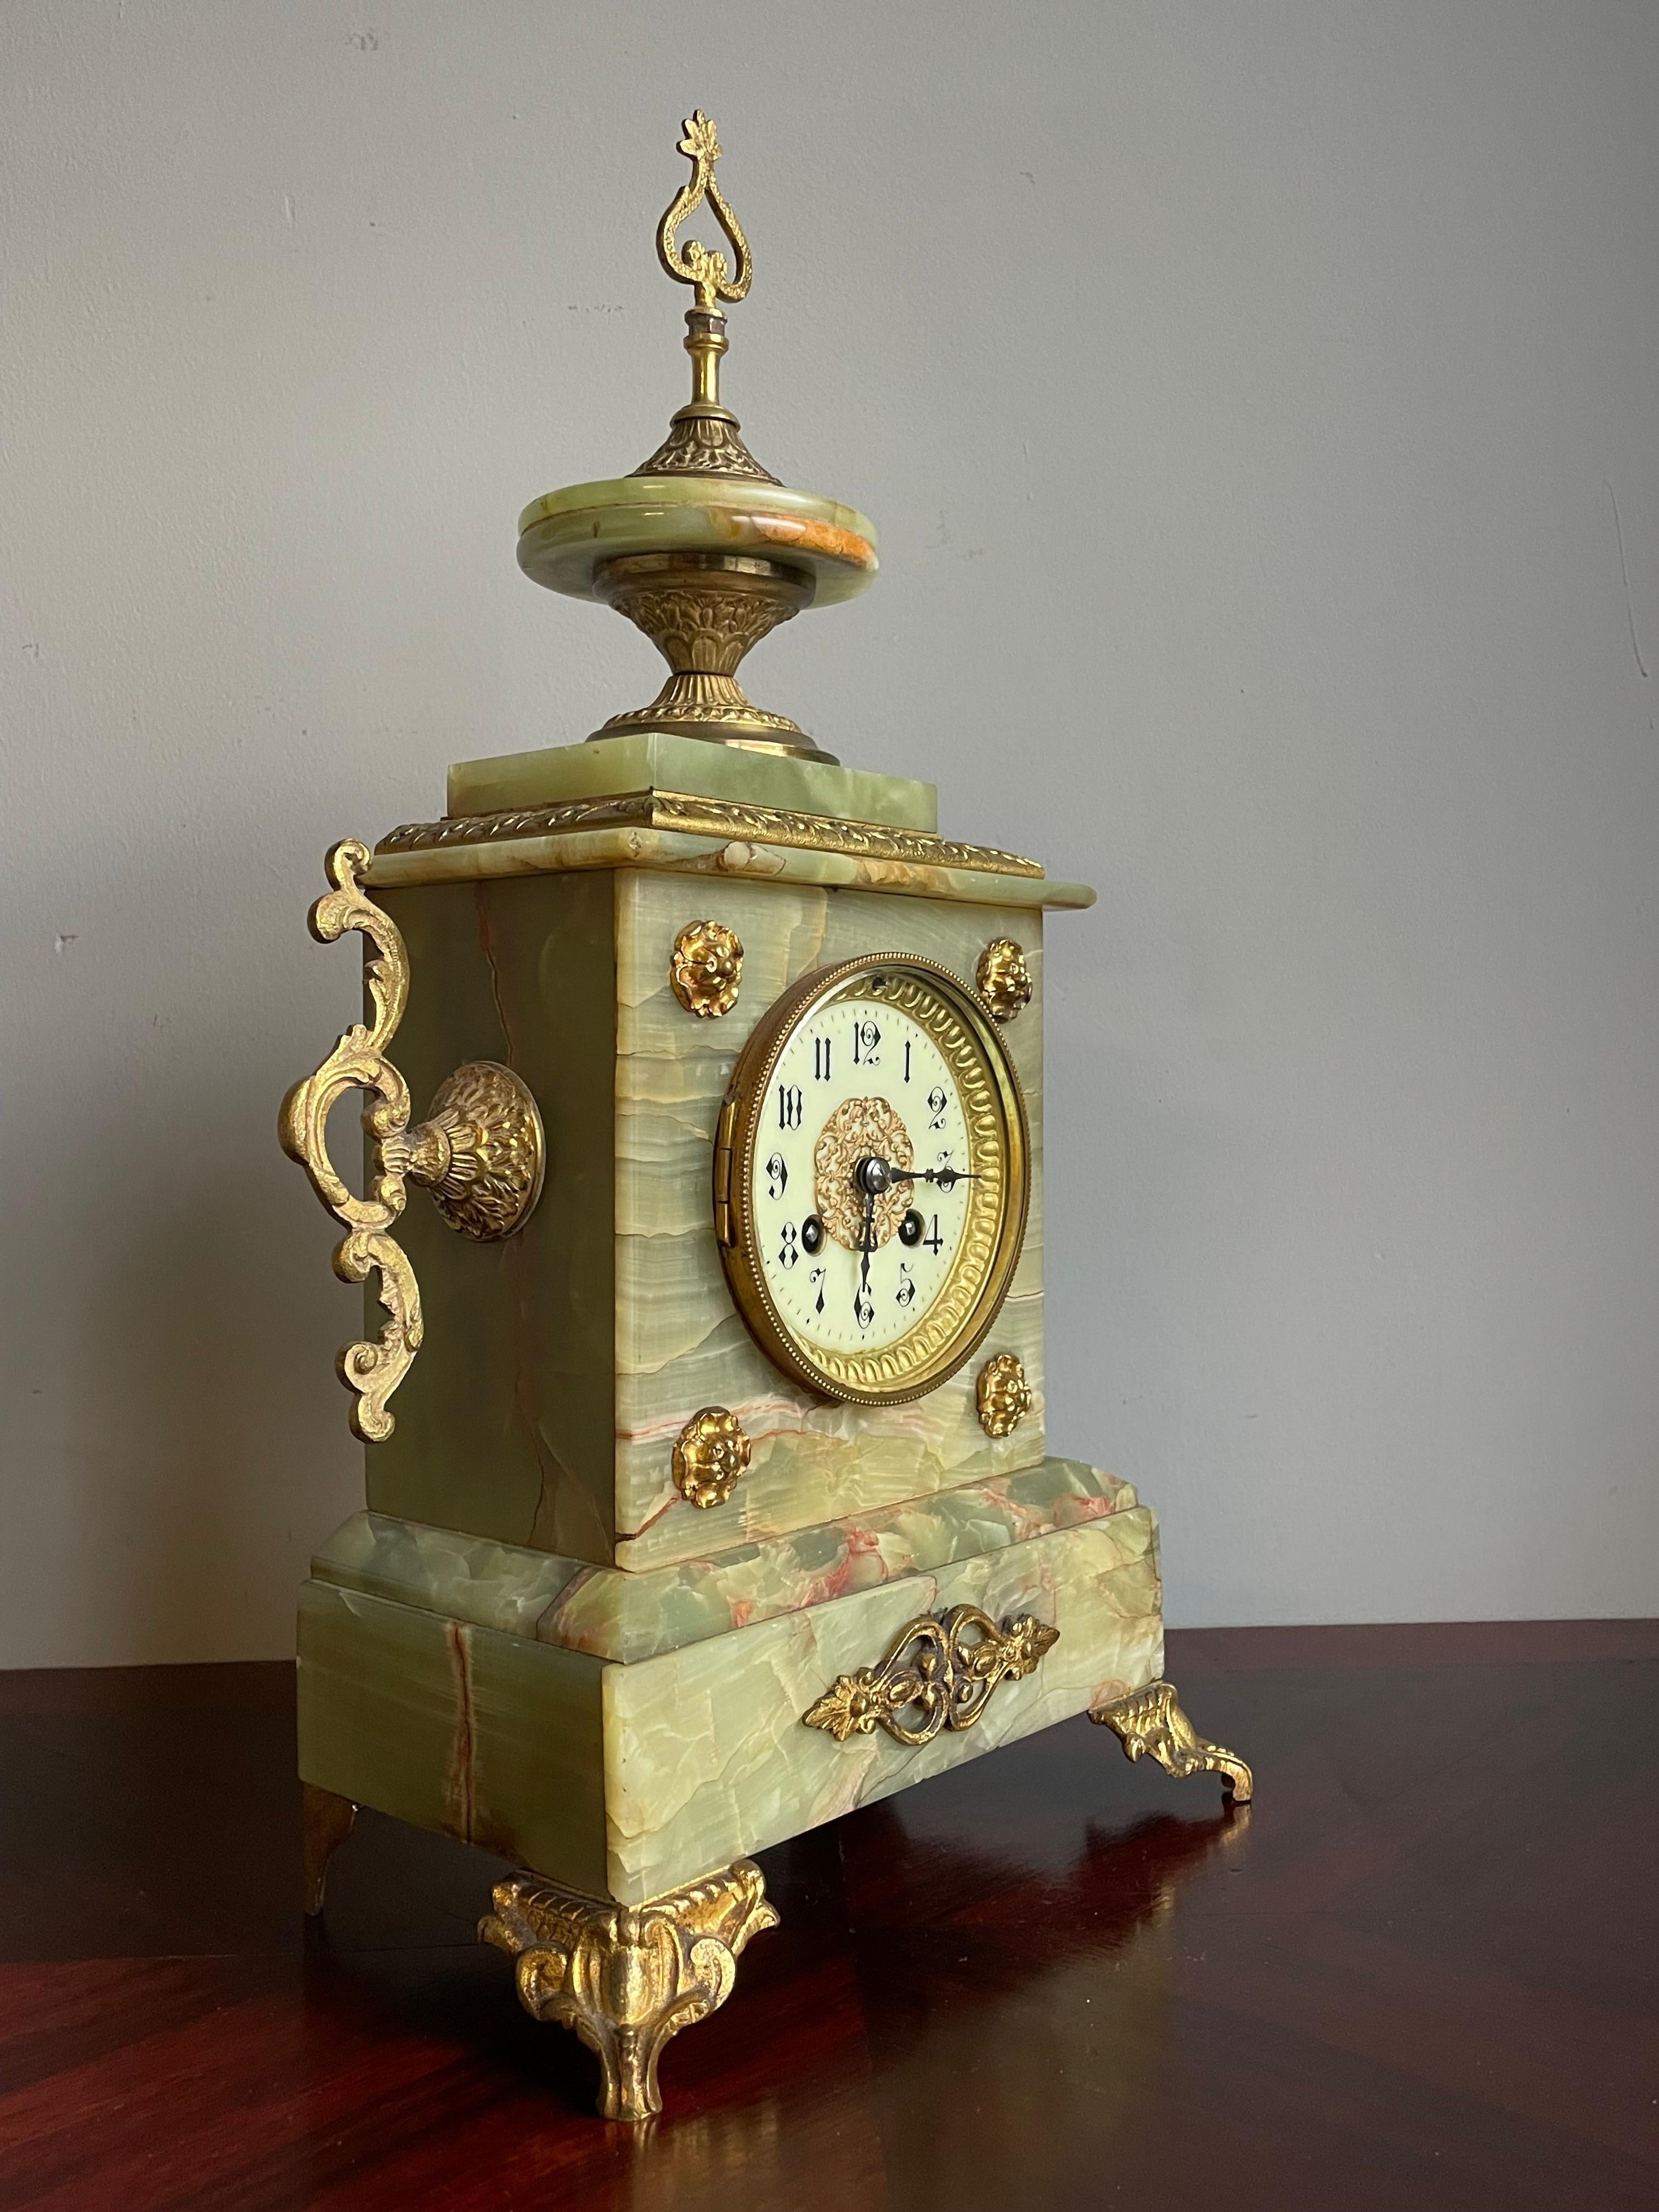 Great colors & wonderful design antique clock from the early 1900s.

Just from looking at the stunning design, multiple quality materials and amazing details one can see that this remarkable antique clock could only have been hand-crafted by a